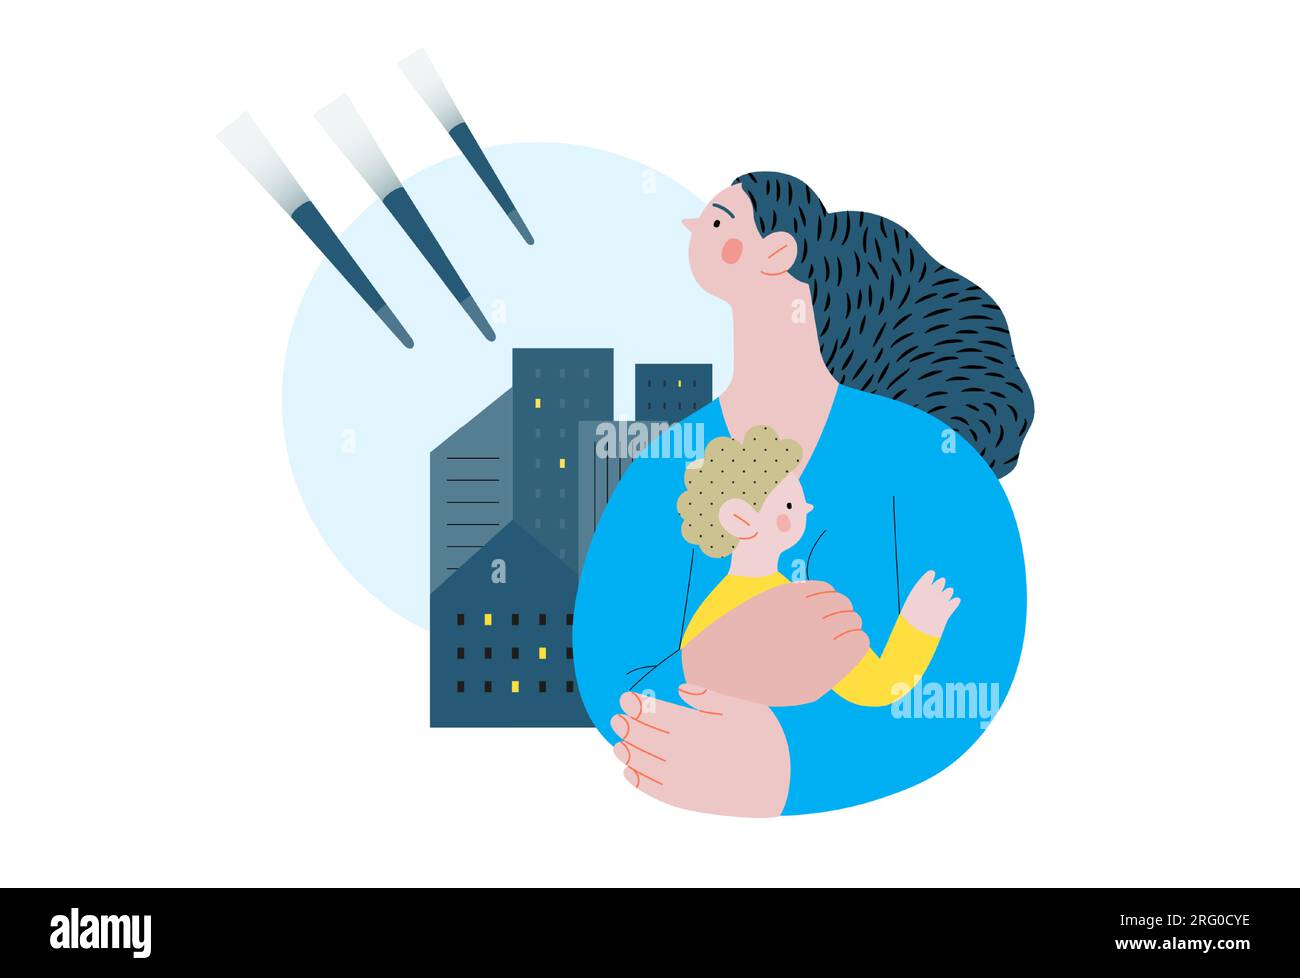 War and peace - Stop war -modern flat vector concept digital illustration of young mother holding a child and shells bombing houses on the background, Stock Vector